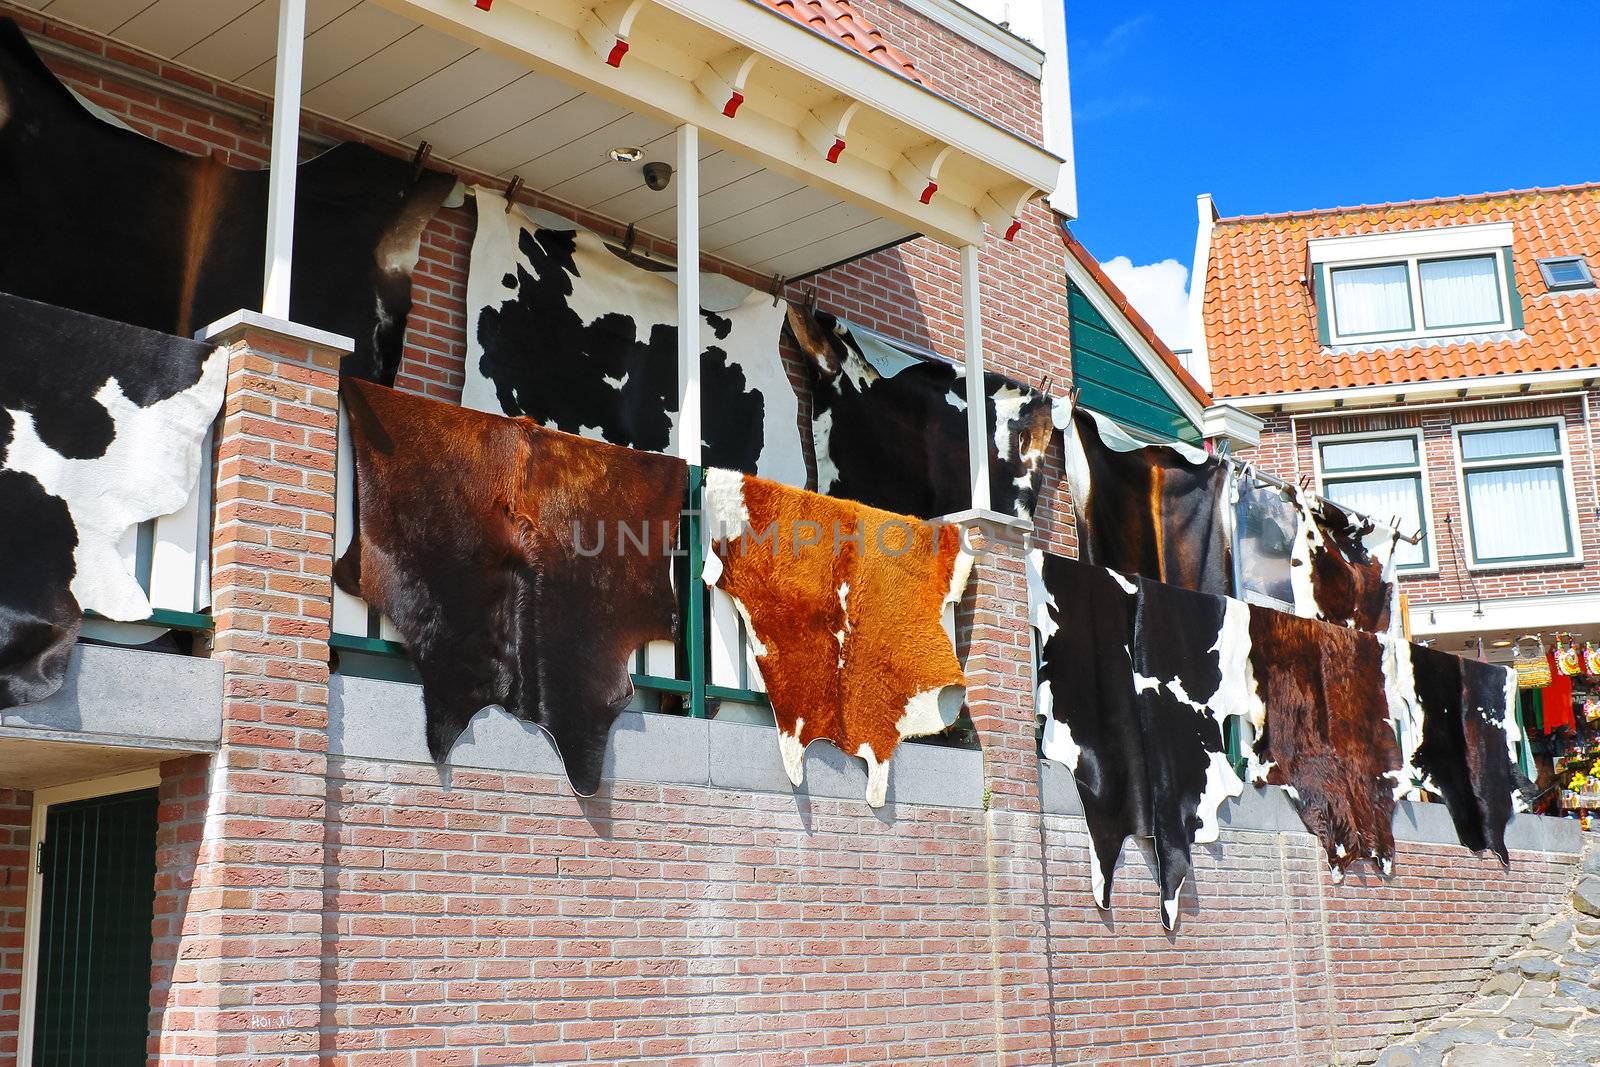 Tanned hides on the balcony of the leather shop in Volendam. Netherlands